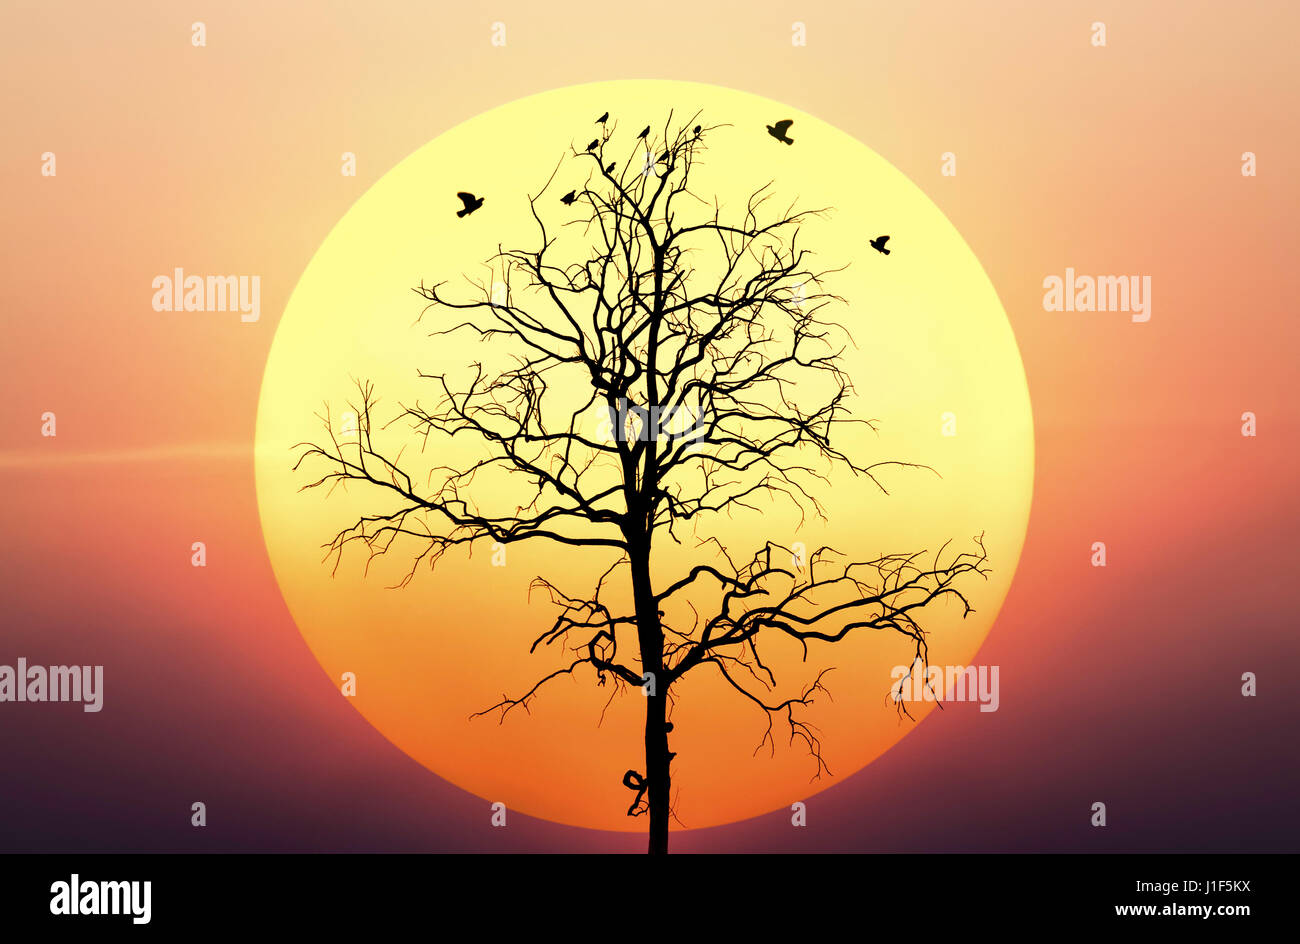 Dead Tree Silhouette Against With Big Sunset And Sky Stock Photo Alamy